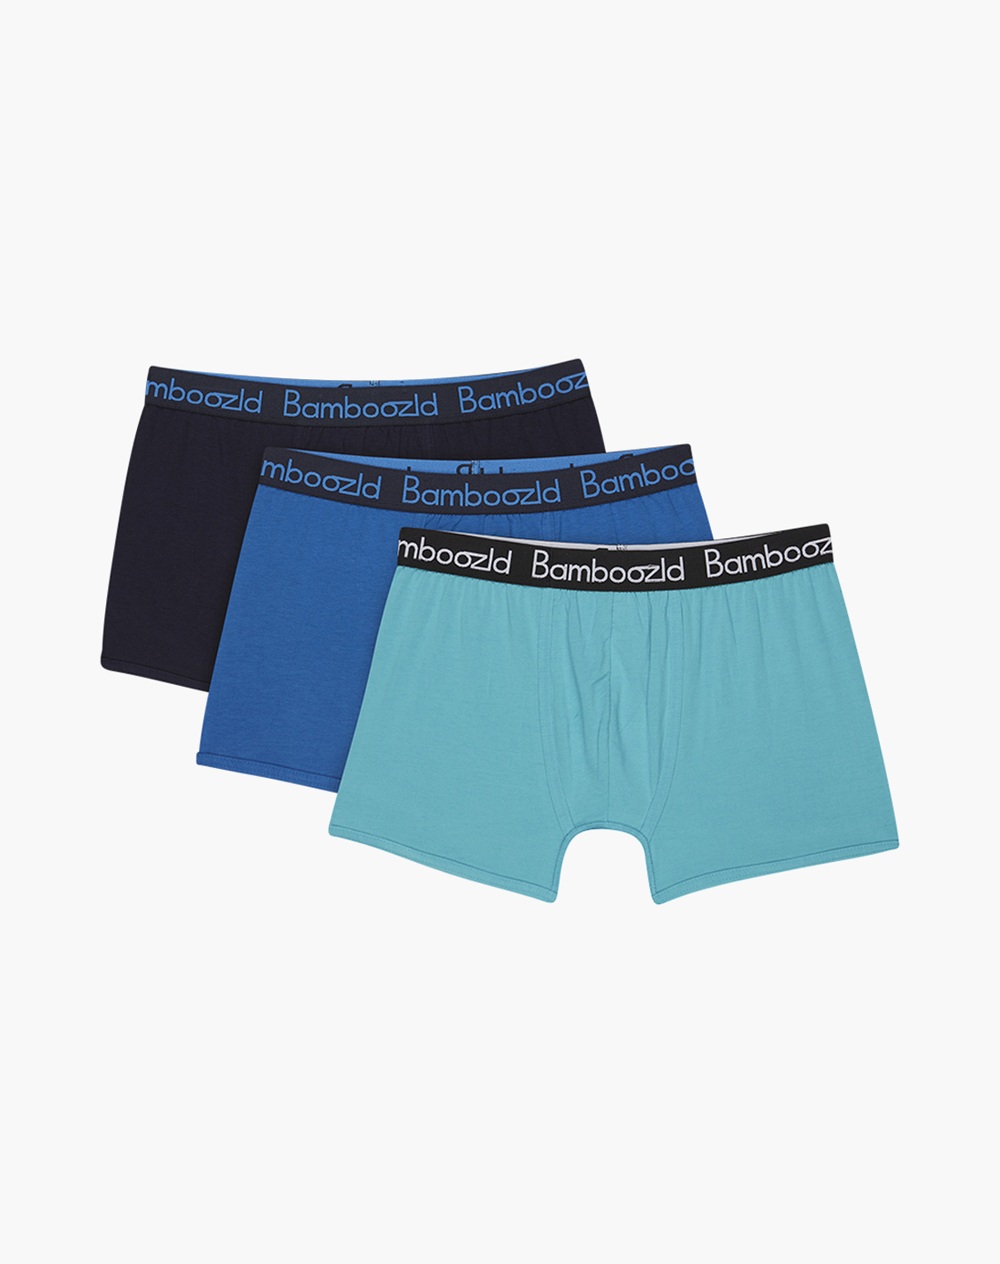 MENS COMFY BAMBOO 3 PACK TRUNKS - BLUE – Bamboozld